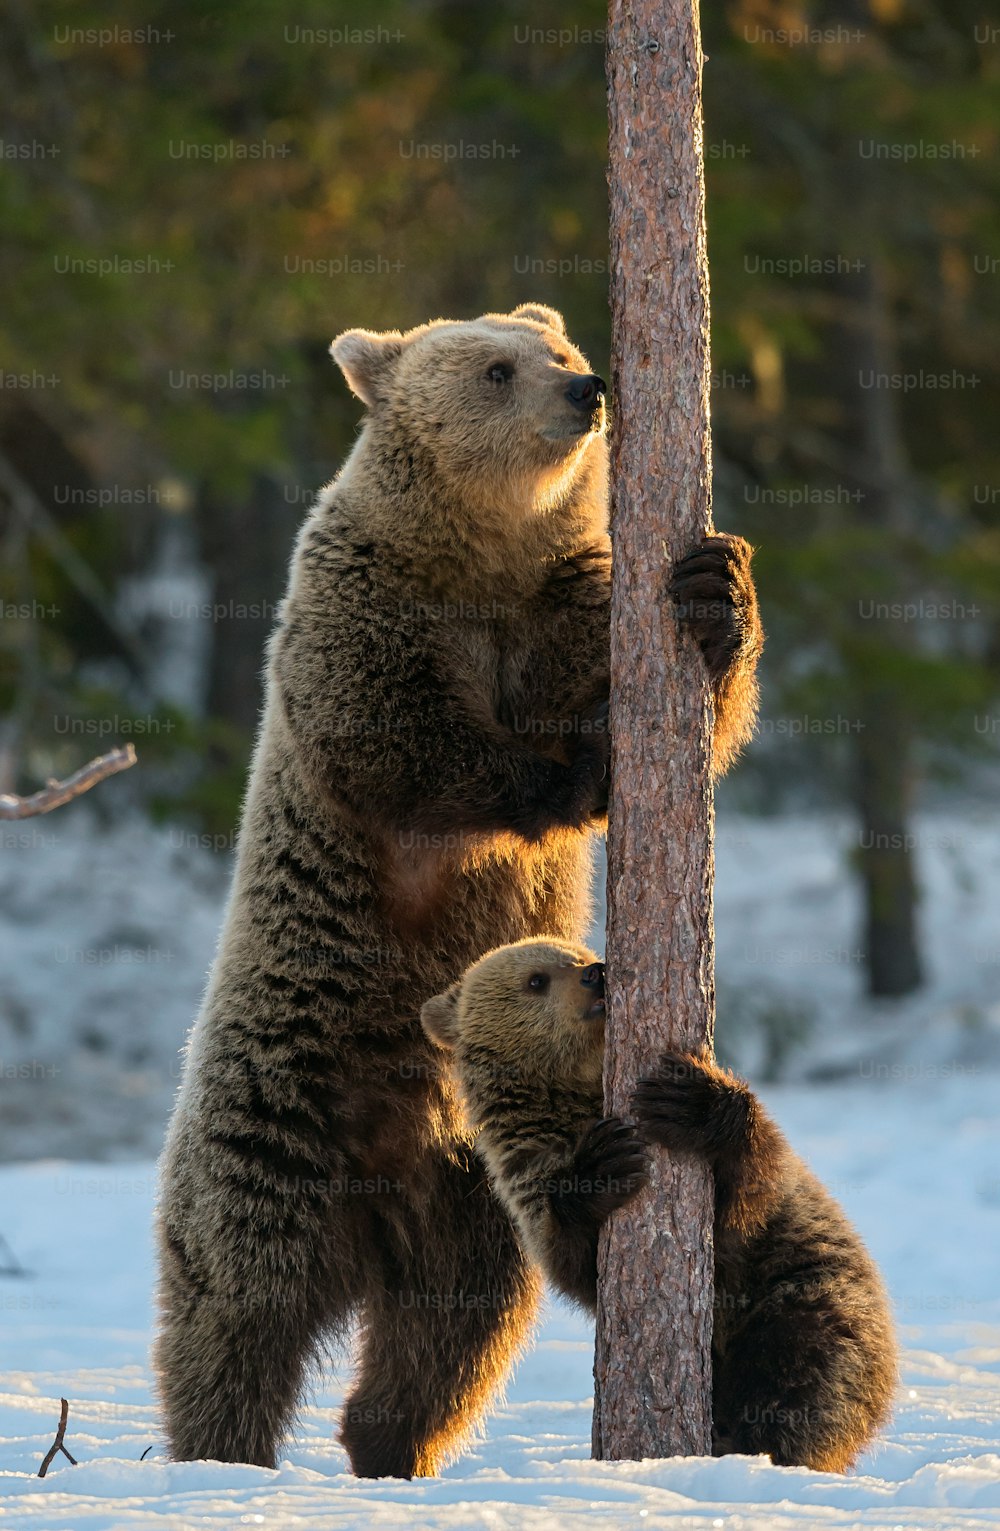 Bear and cub. Brown bears stands on its hind legs by a pine tree in winter forest at sunset light. Scientific name: Ursus arctos. Natural habitat. Winter season."n